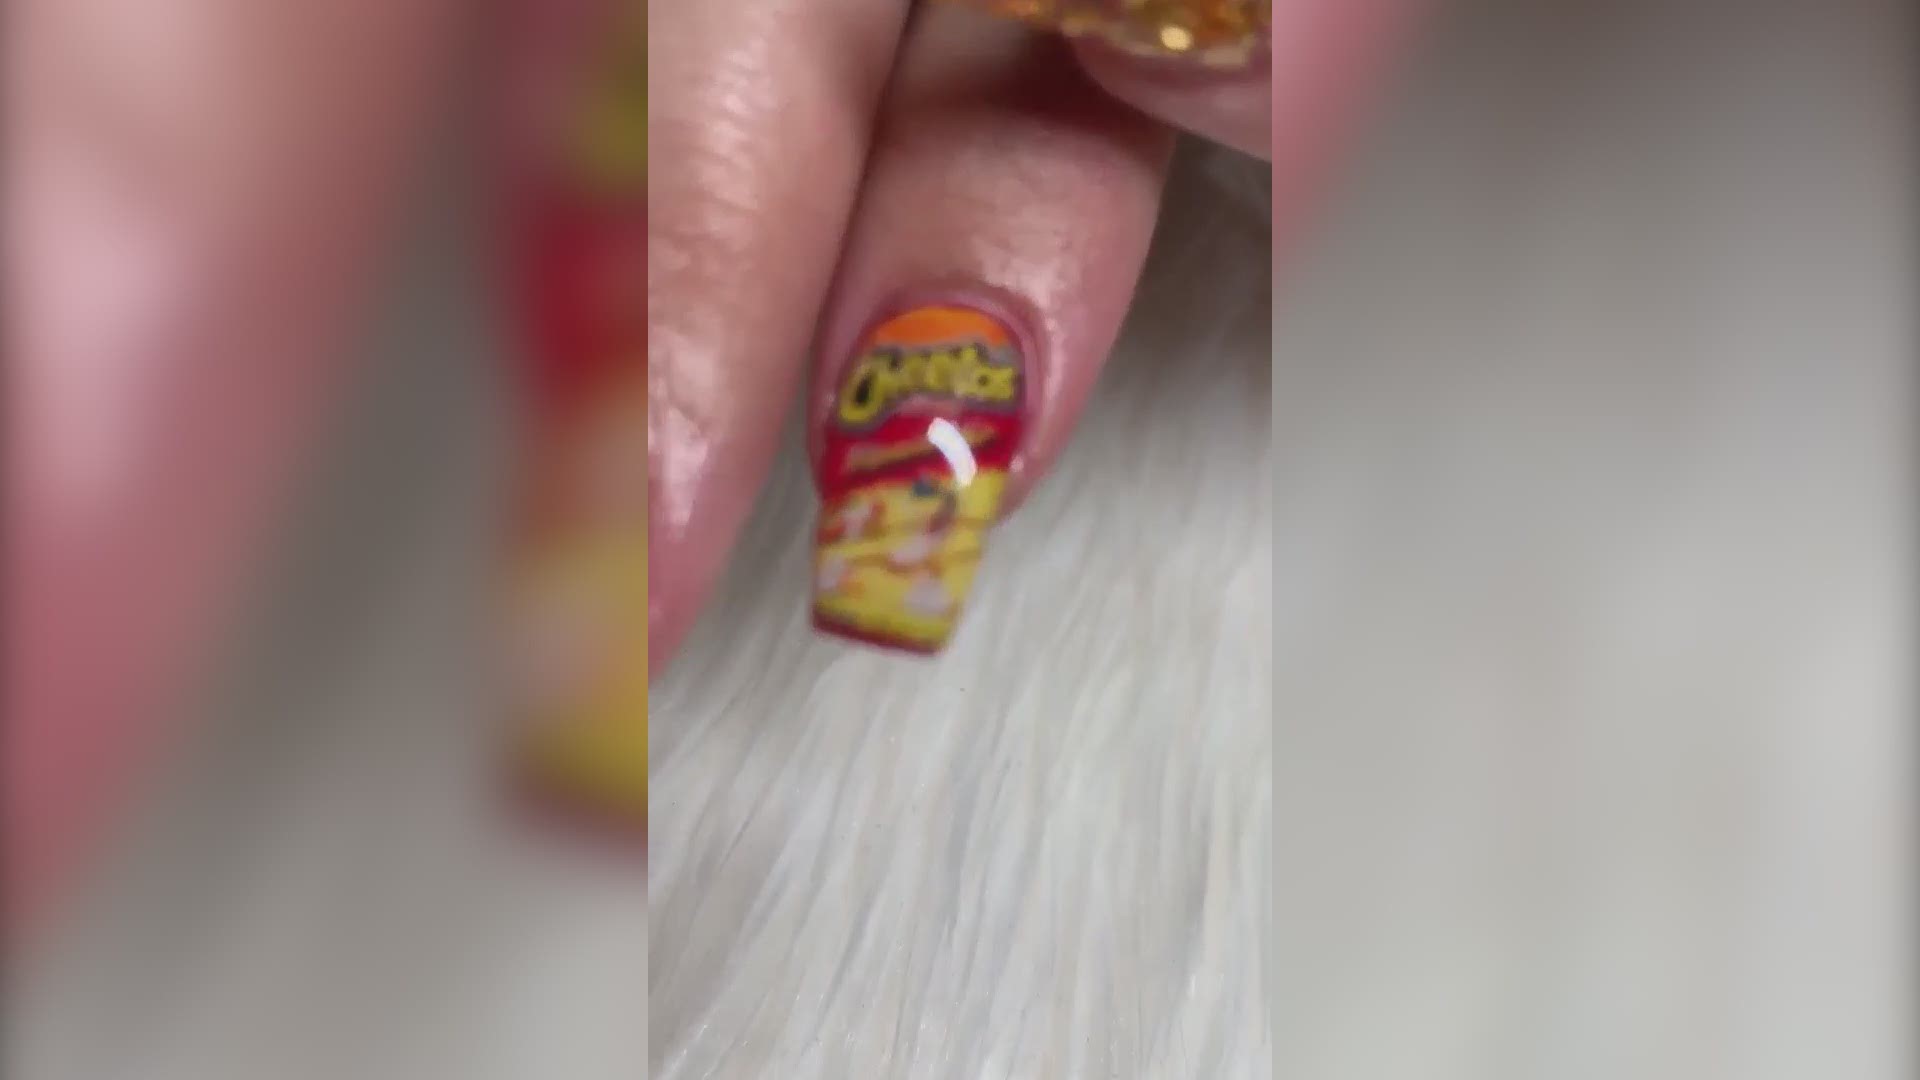 A San Antonio nail salon, Nails by Mimi, is turning up the heat with these unique Flamin' Hot Cheetos nail designs.